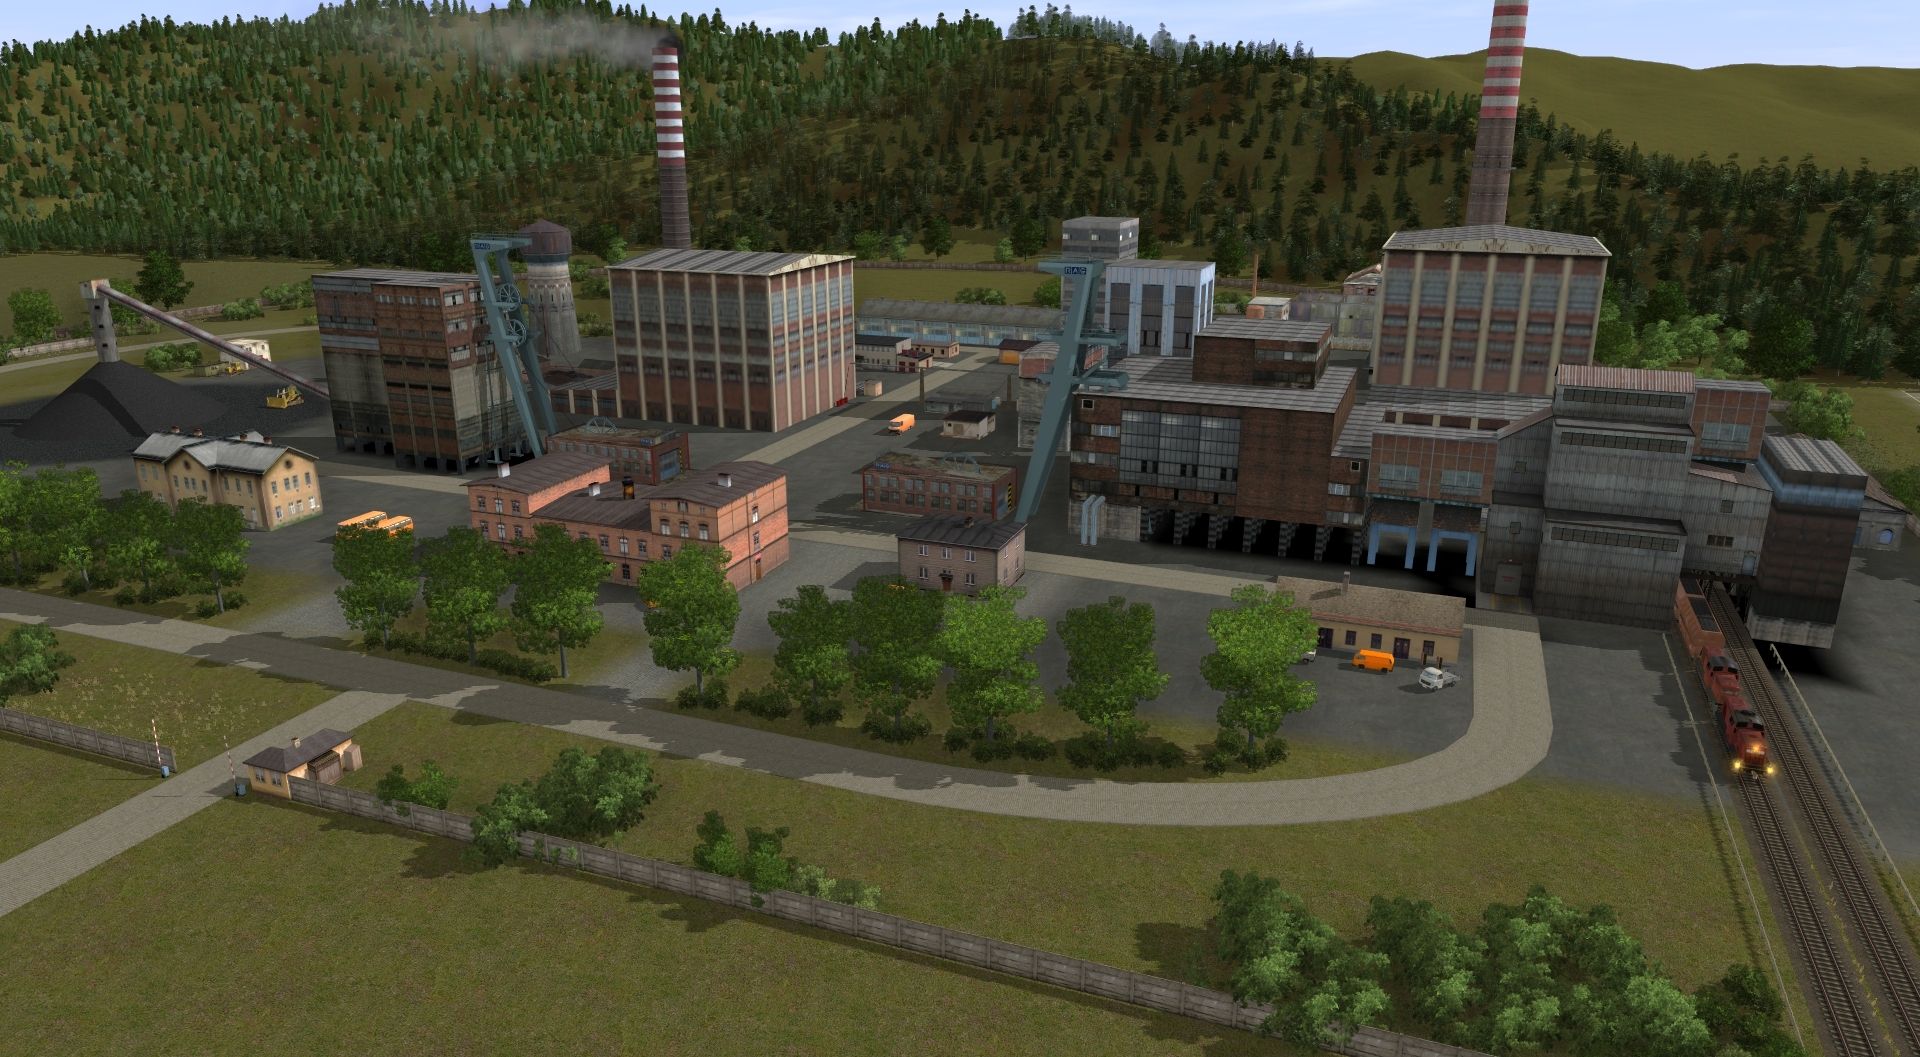 DB-V90s-at-the-colliery-complex.jpg